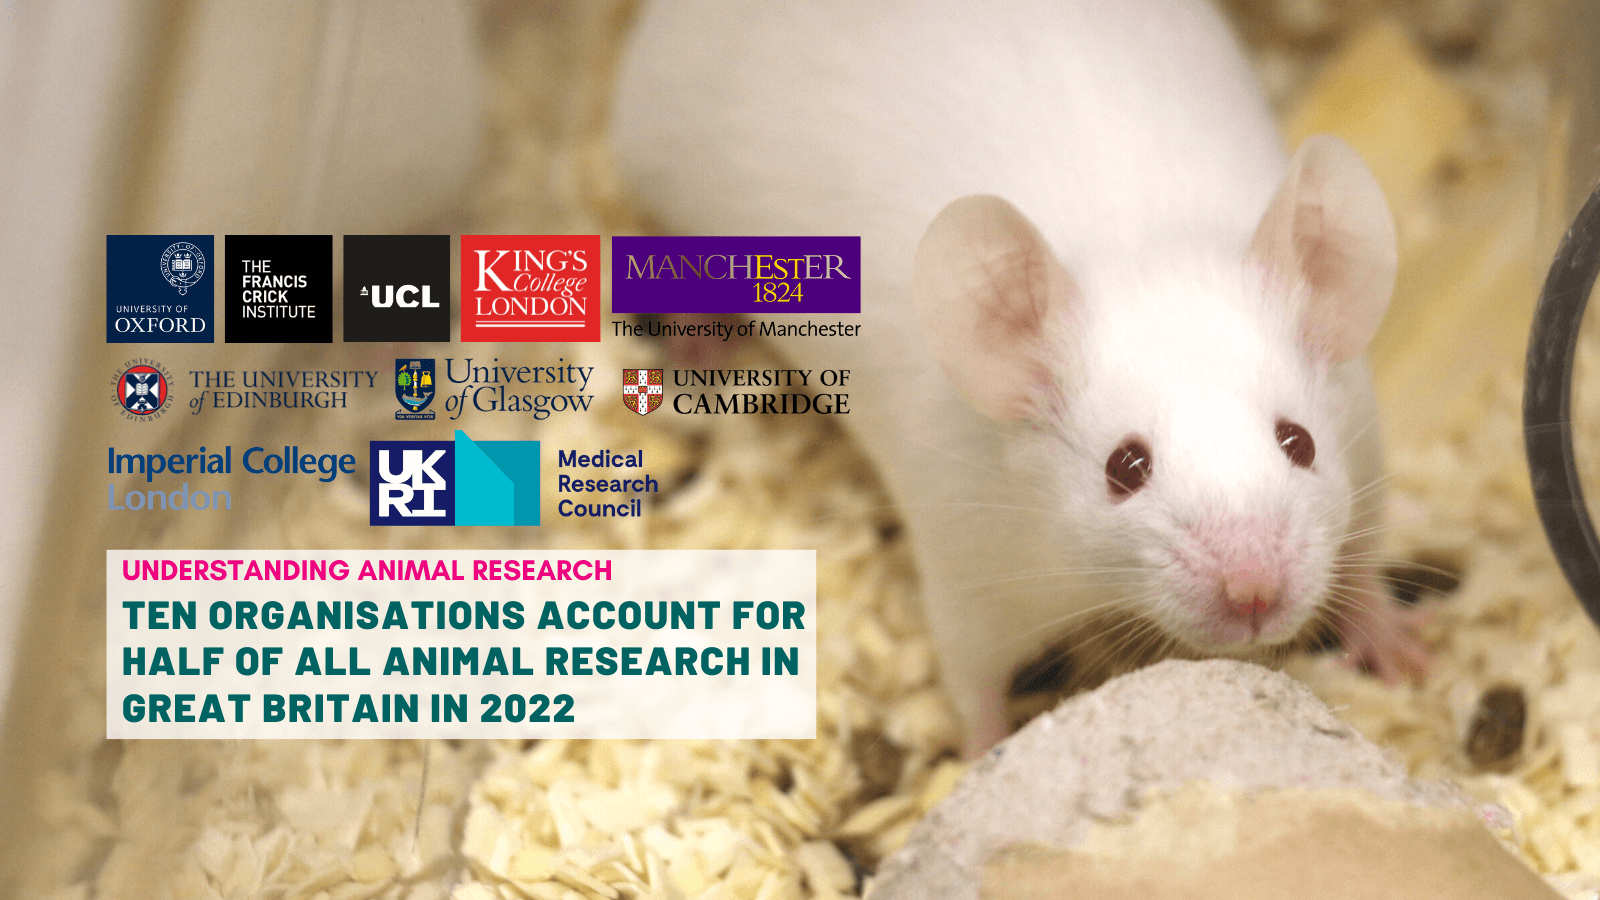 Ten organisations account for half of all animal research in Great Britain in 2022